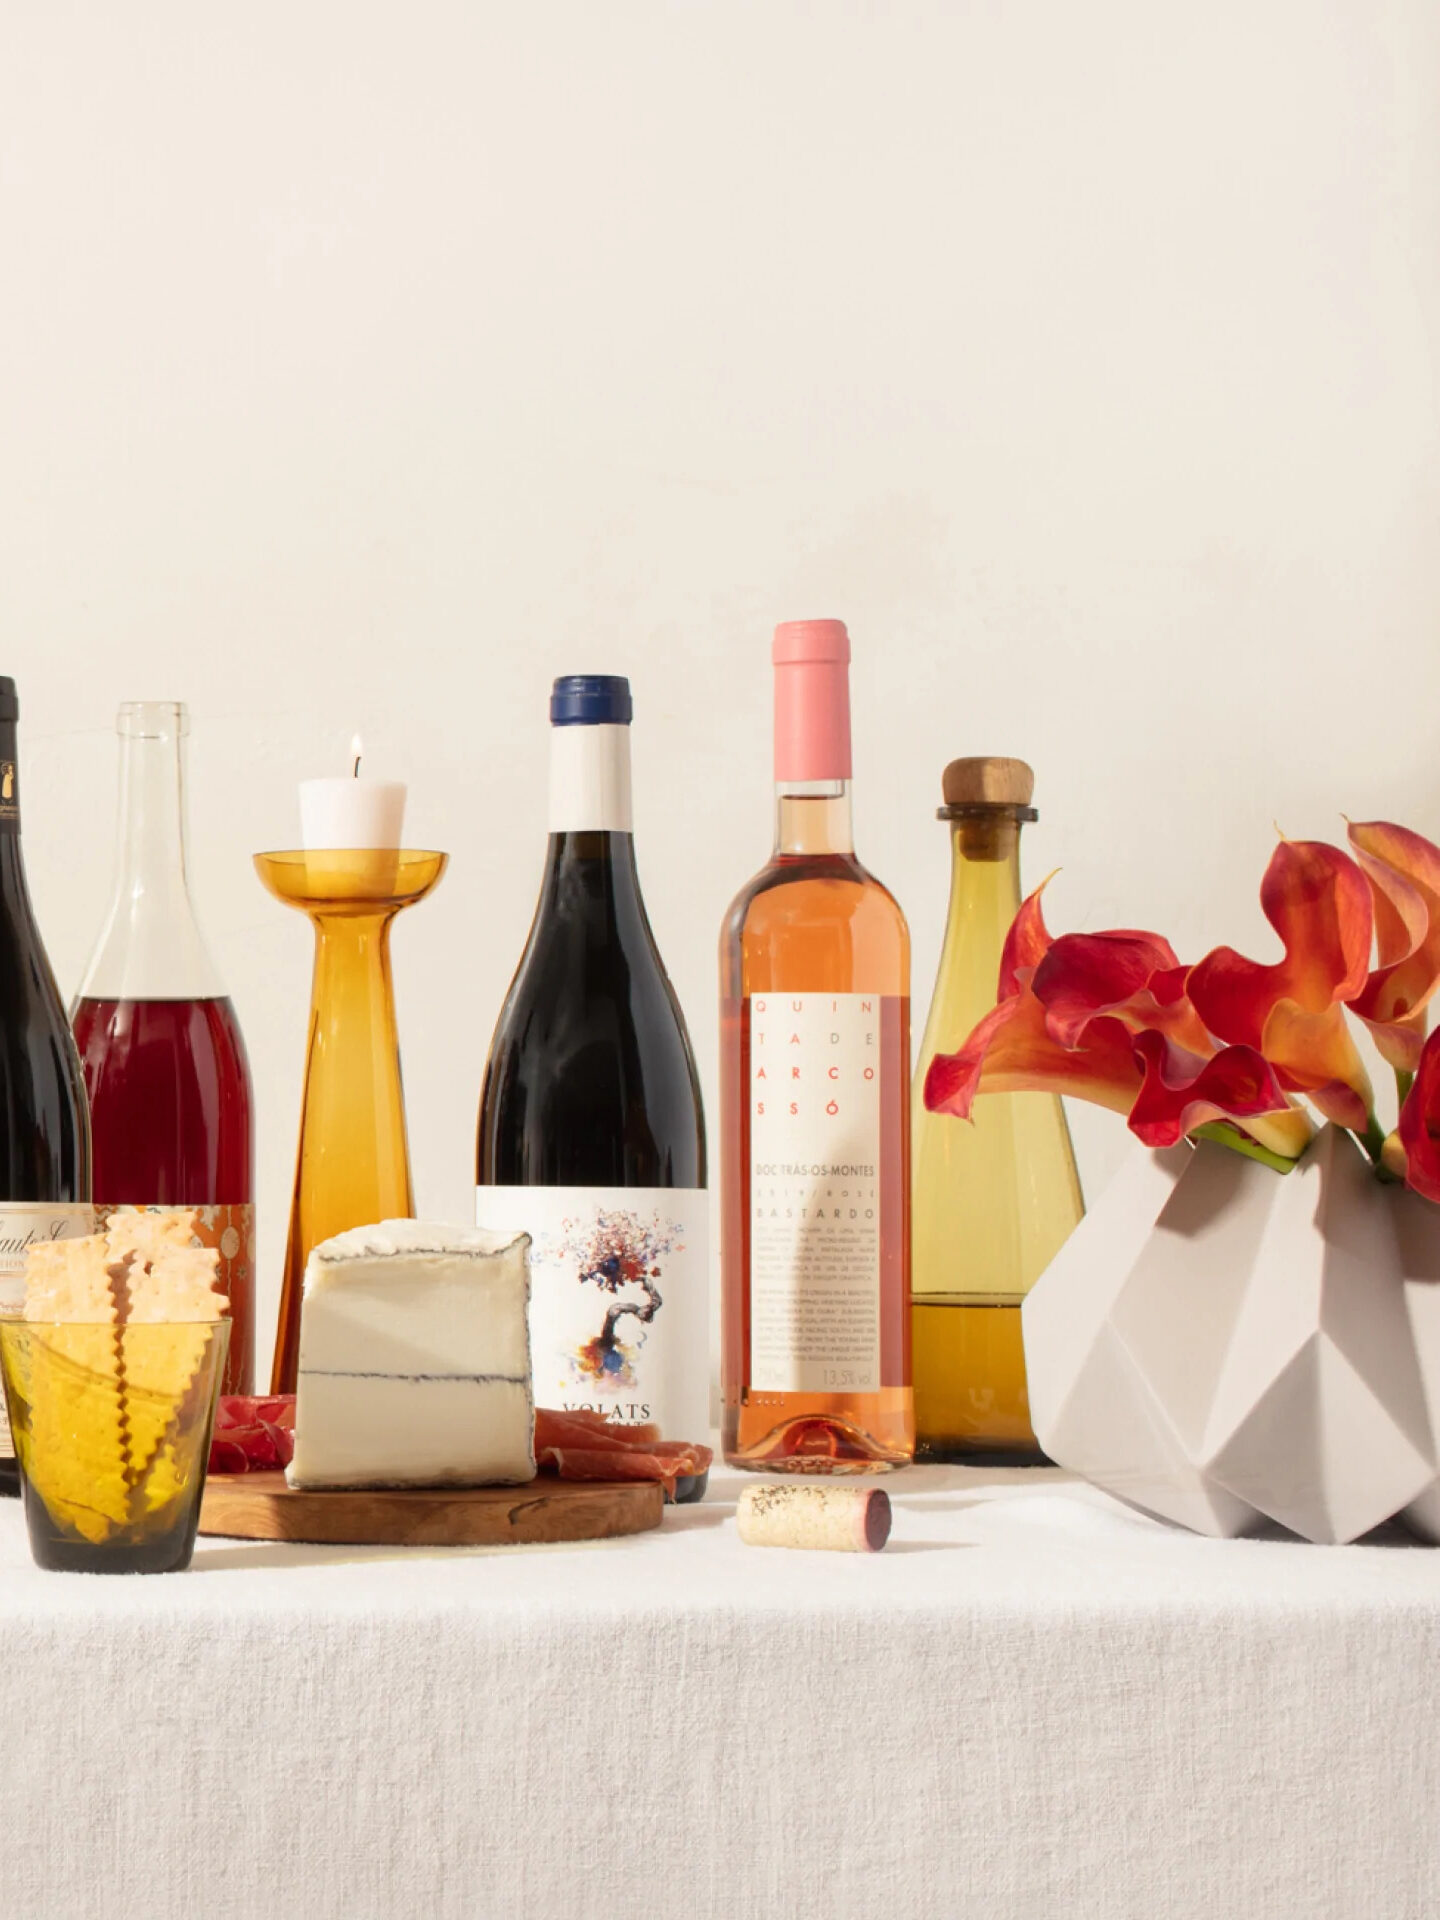 A tablescape of snacks, candles, wine bottles, and more.